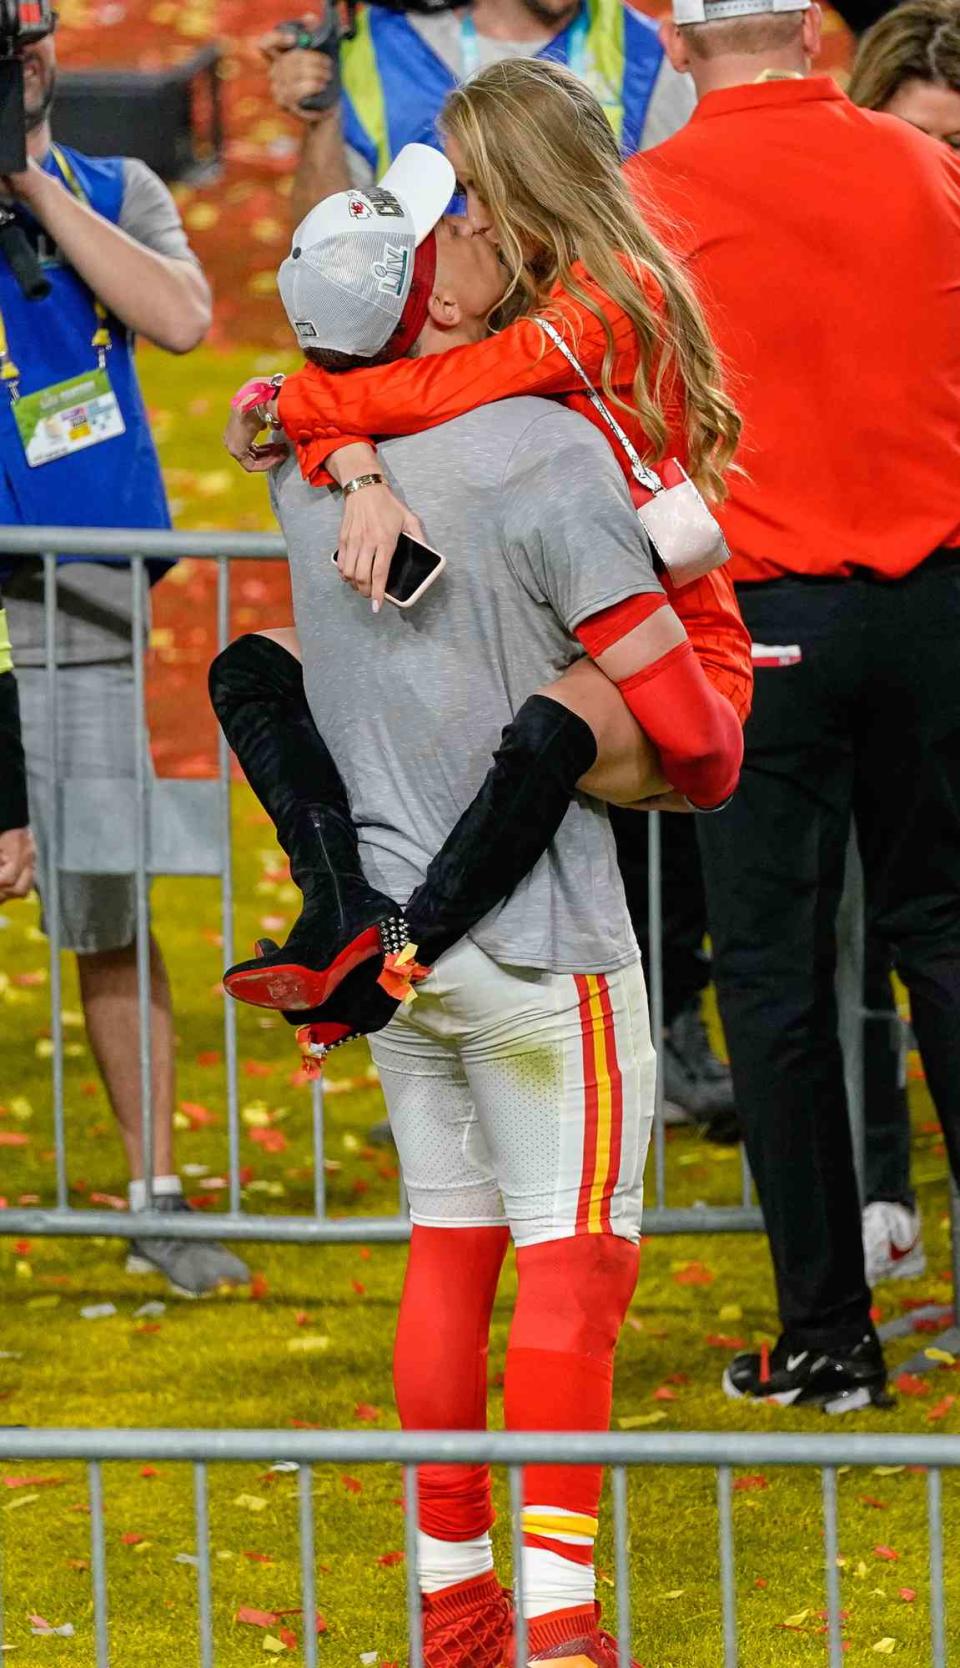 Kansas City Chiefs quarterback Patrick Mahomes (15) celebrates with girlfriend and high school sweetheart Brittany Matthews after game action during the Super Bowl LIV game between the Kansas City Chiefs and the San Francisco 49ers on February 2, 2020 at Hard Rock Stadium, in Miami Gardens, FL